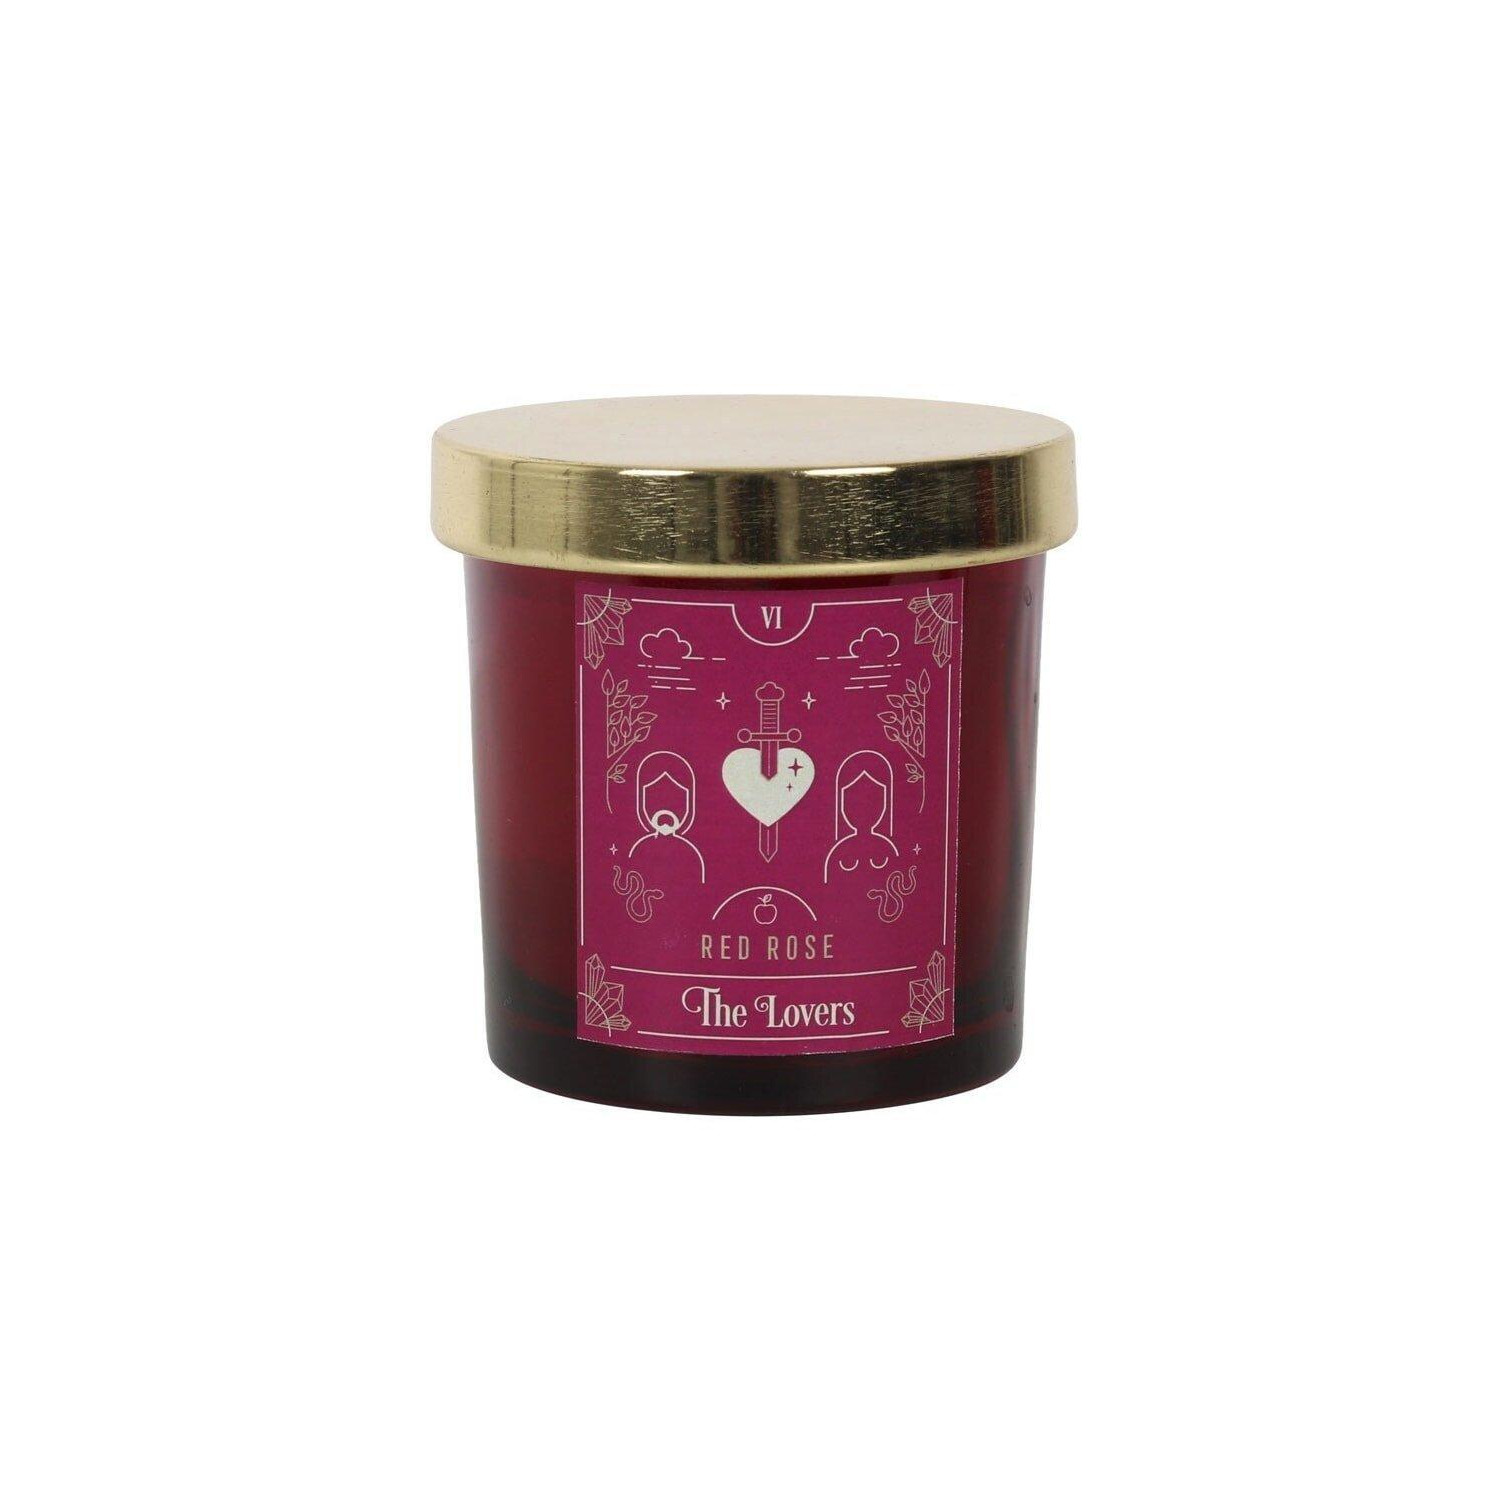 Red Rose The Lovers Scented Candle - image 1